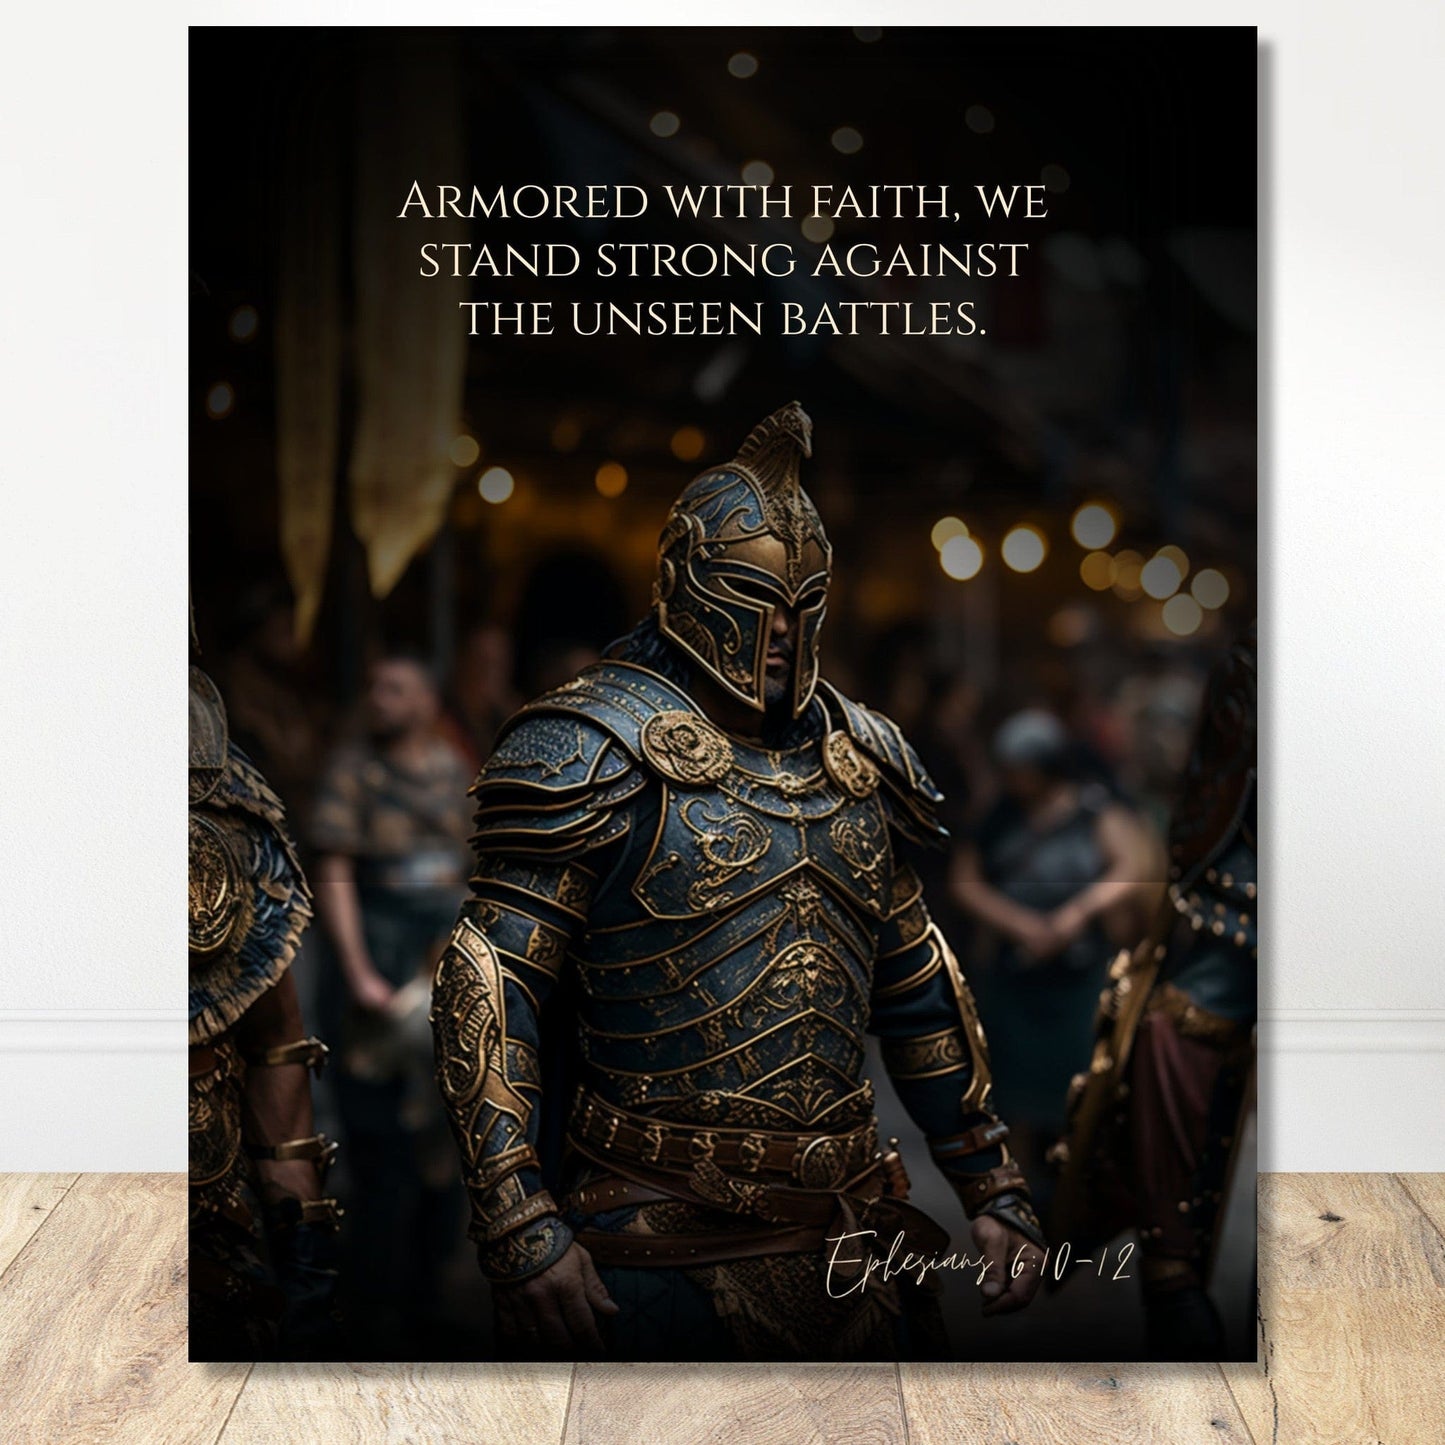 Coffee With My Father Print Material 40x50 cm / 16x20″ / Premium Matte Paper Poster / - The Unseen Battles: Ephesians 6:10-12 - Artwork